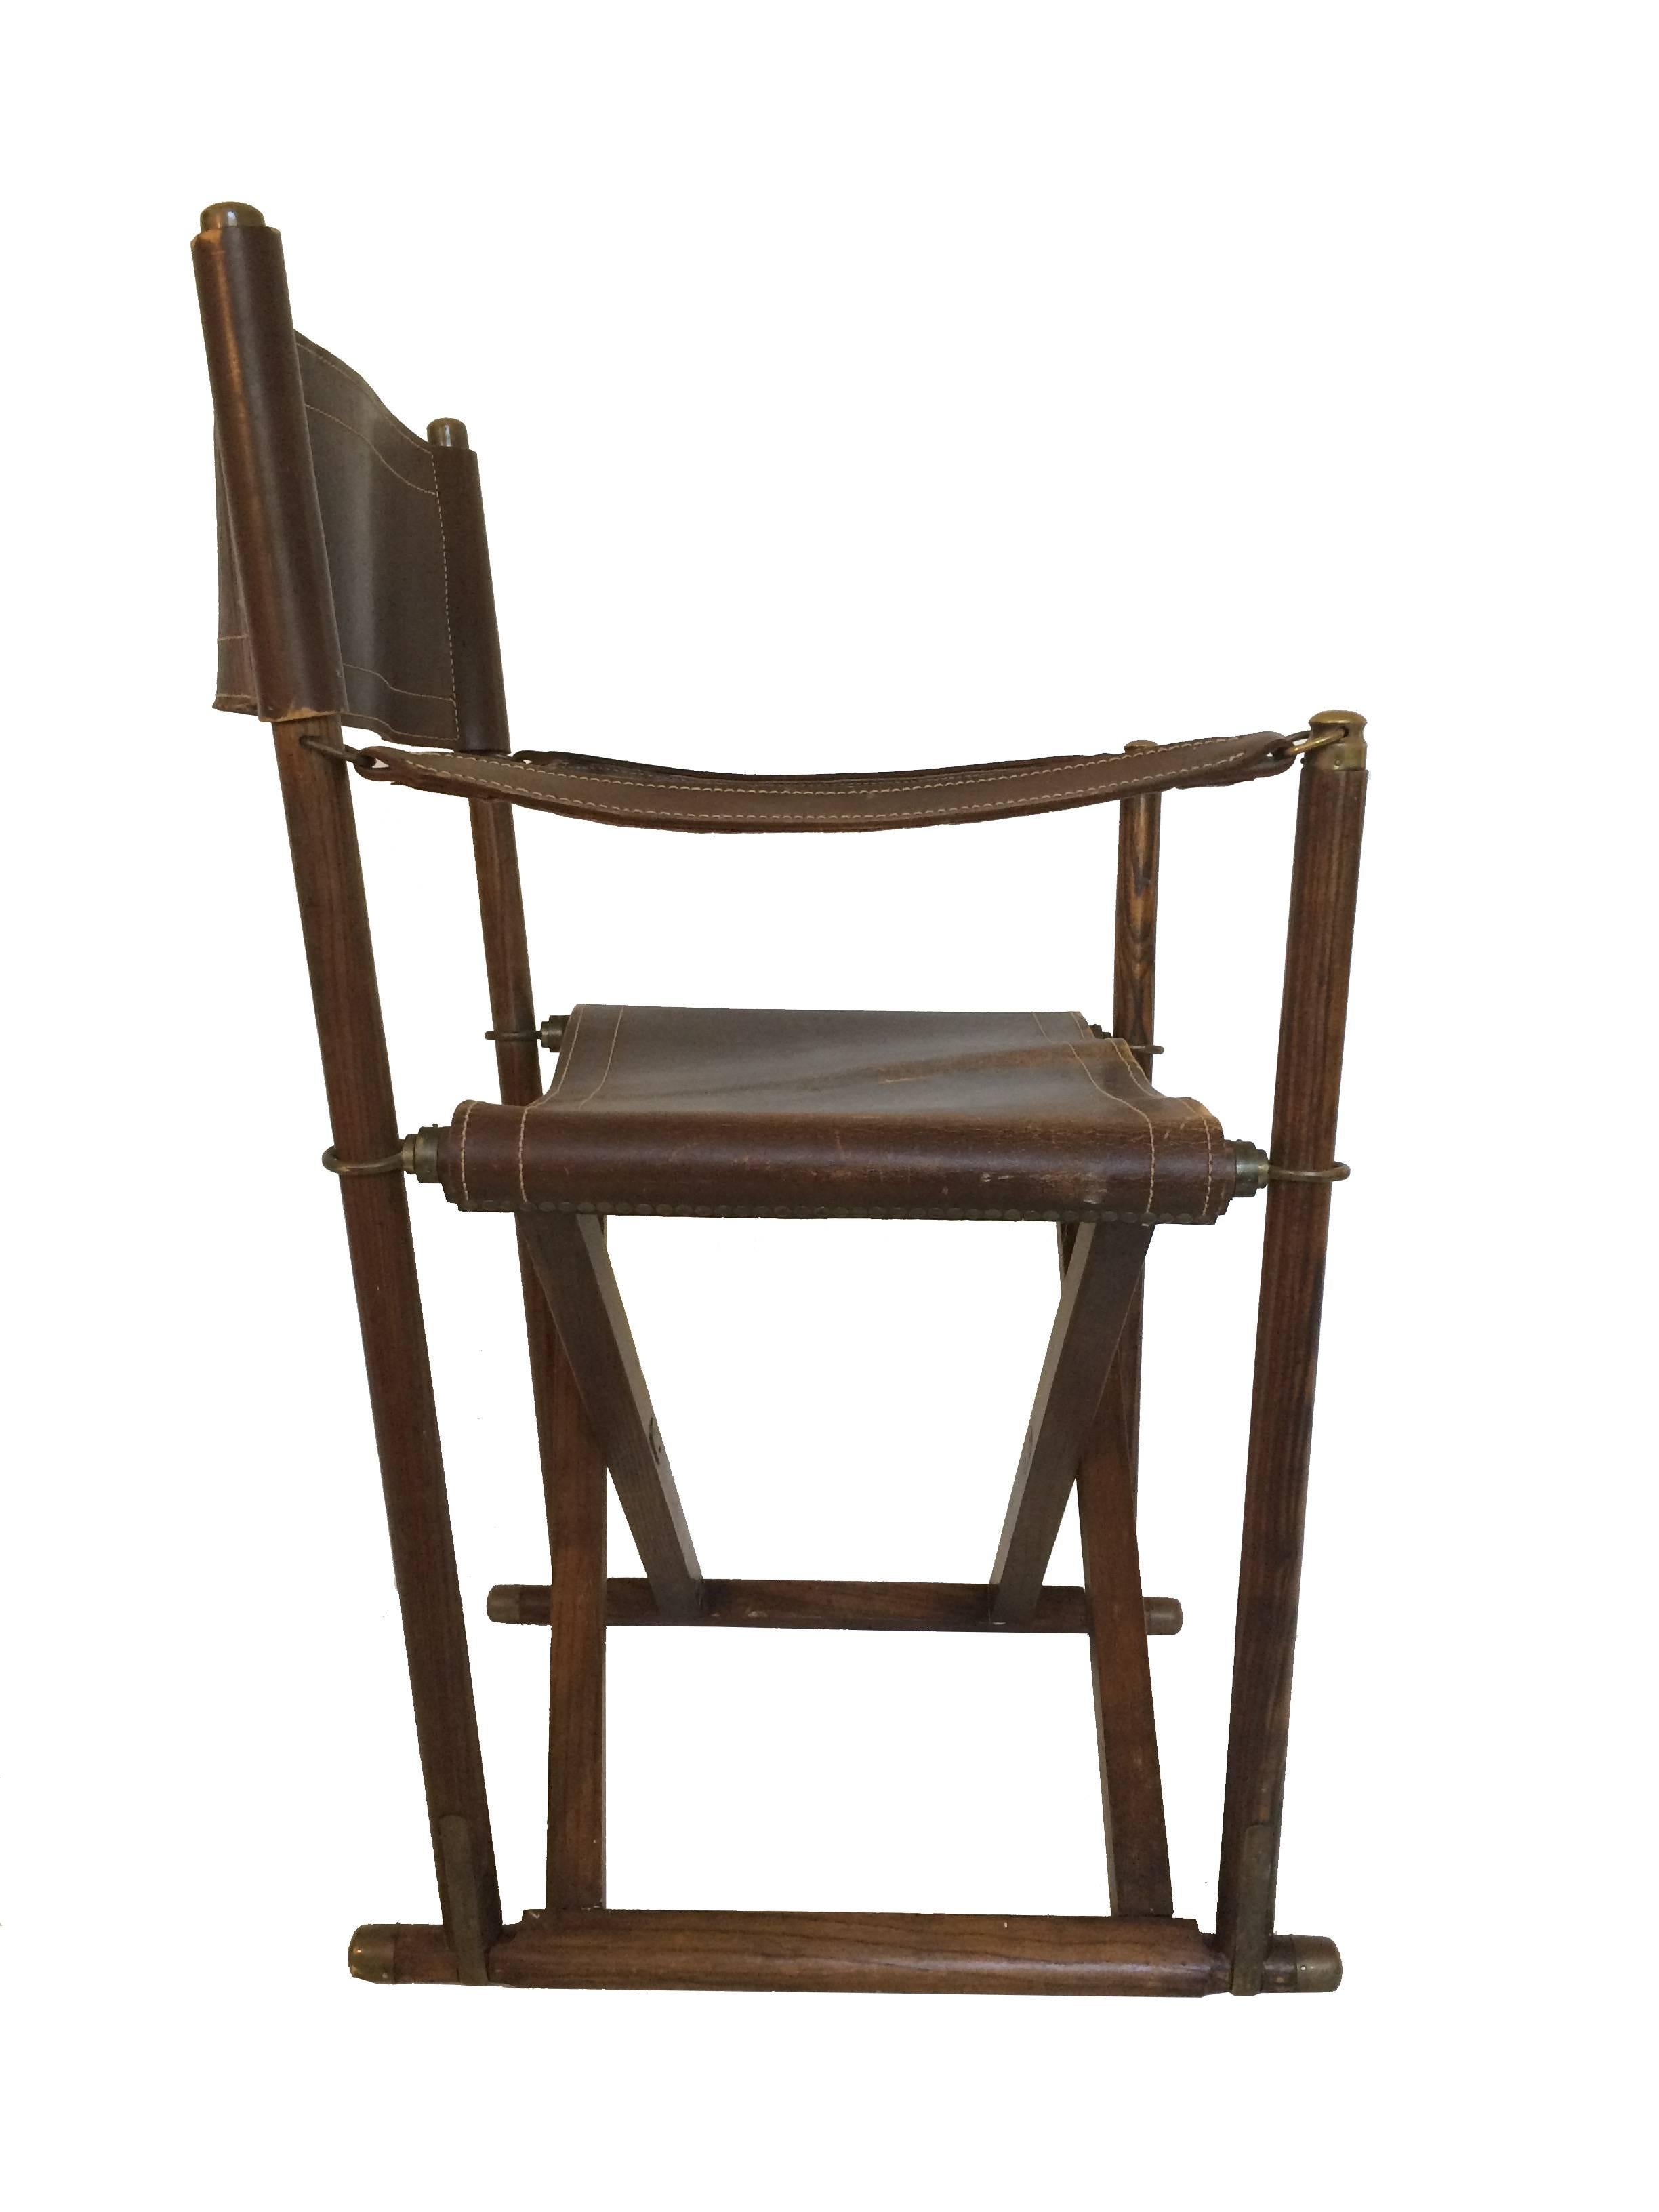 A foldable safari chair by Danish architect and designer Mogens Koch. Designed in 1932 the MK-16 is made of a stained frame with leather seating, backrest and armrests and is accented by brass hardware which indicate an early production period.